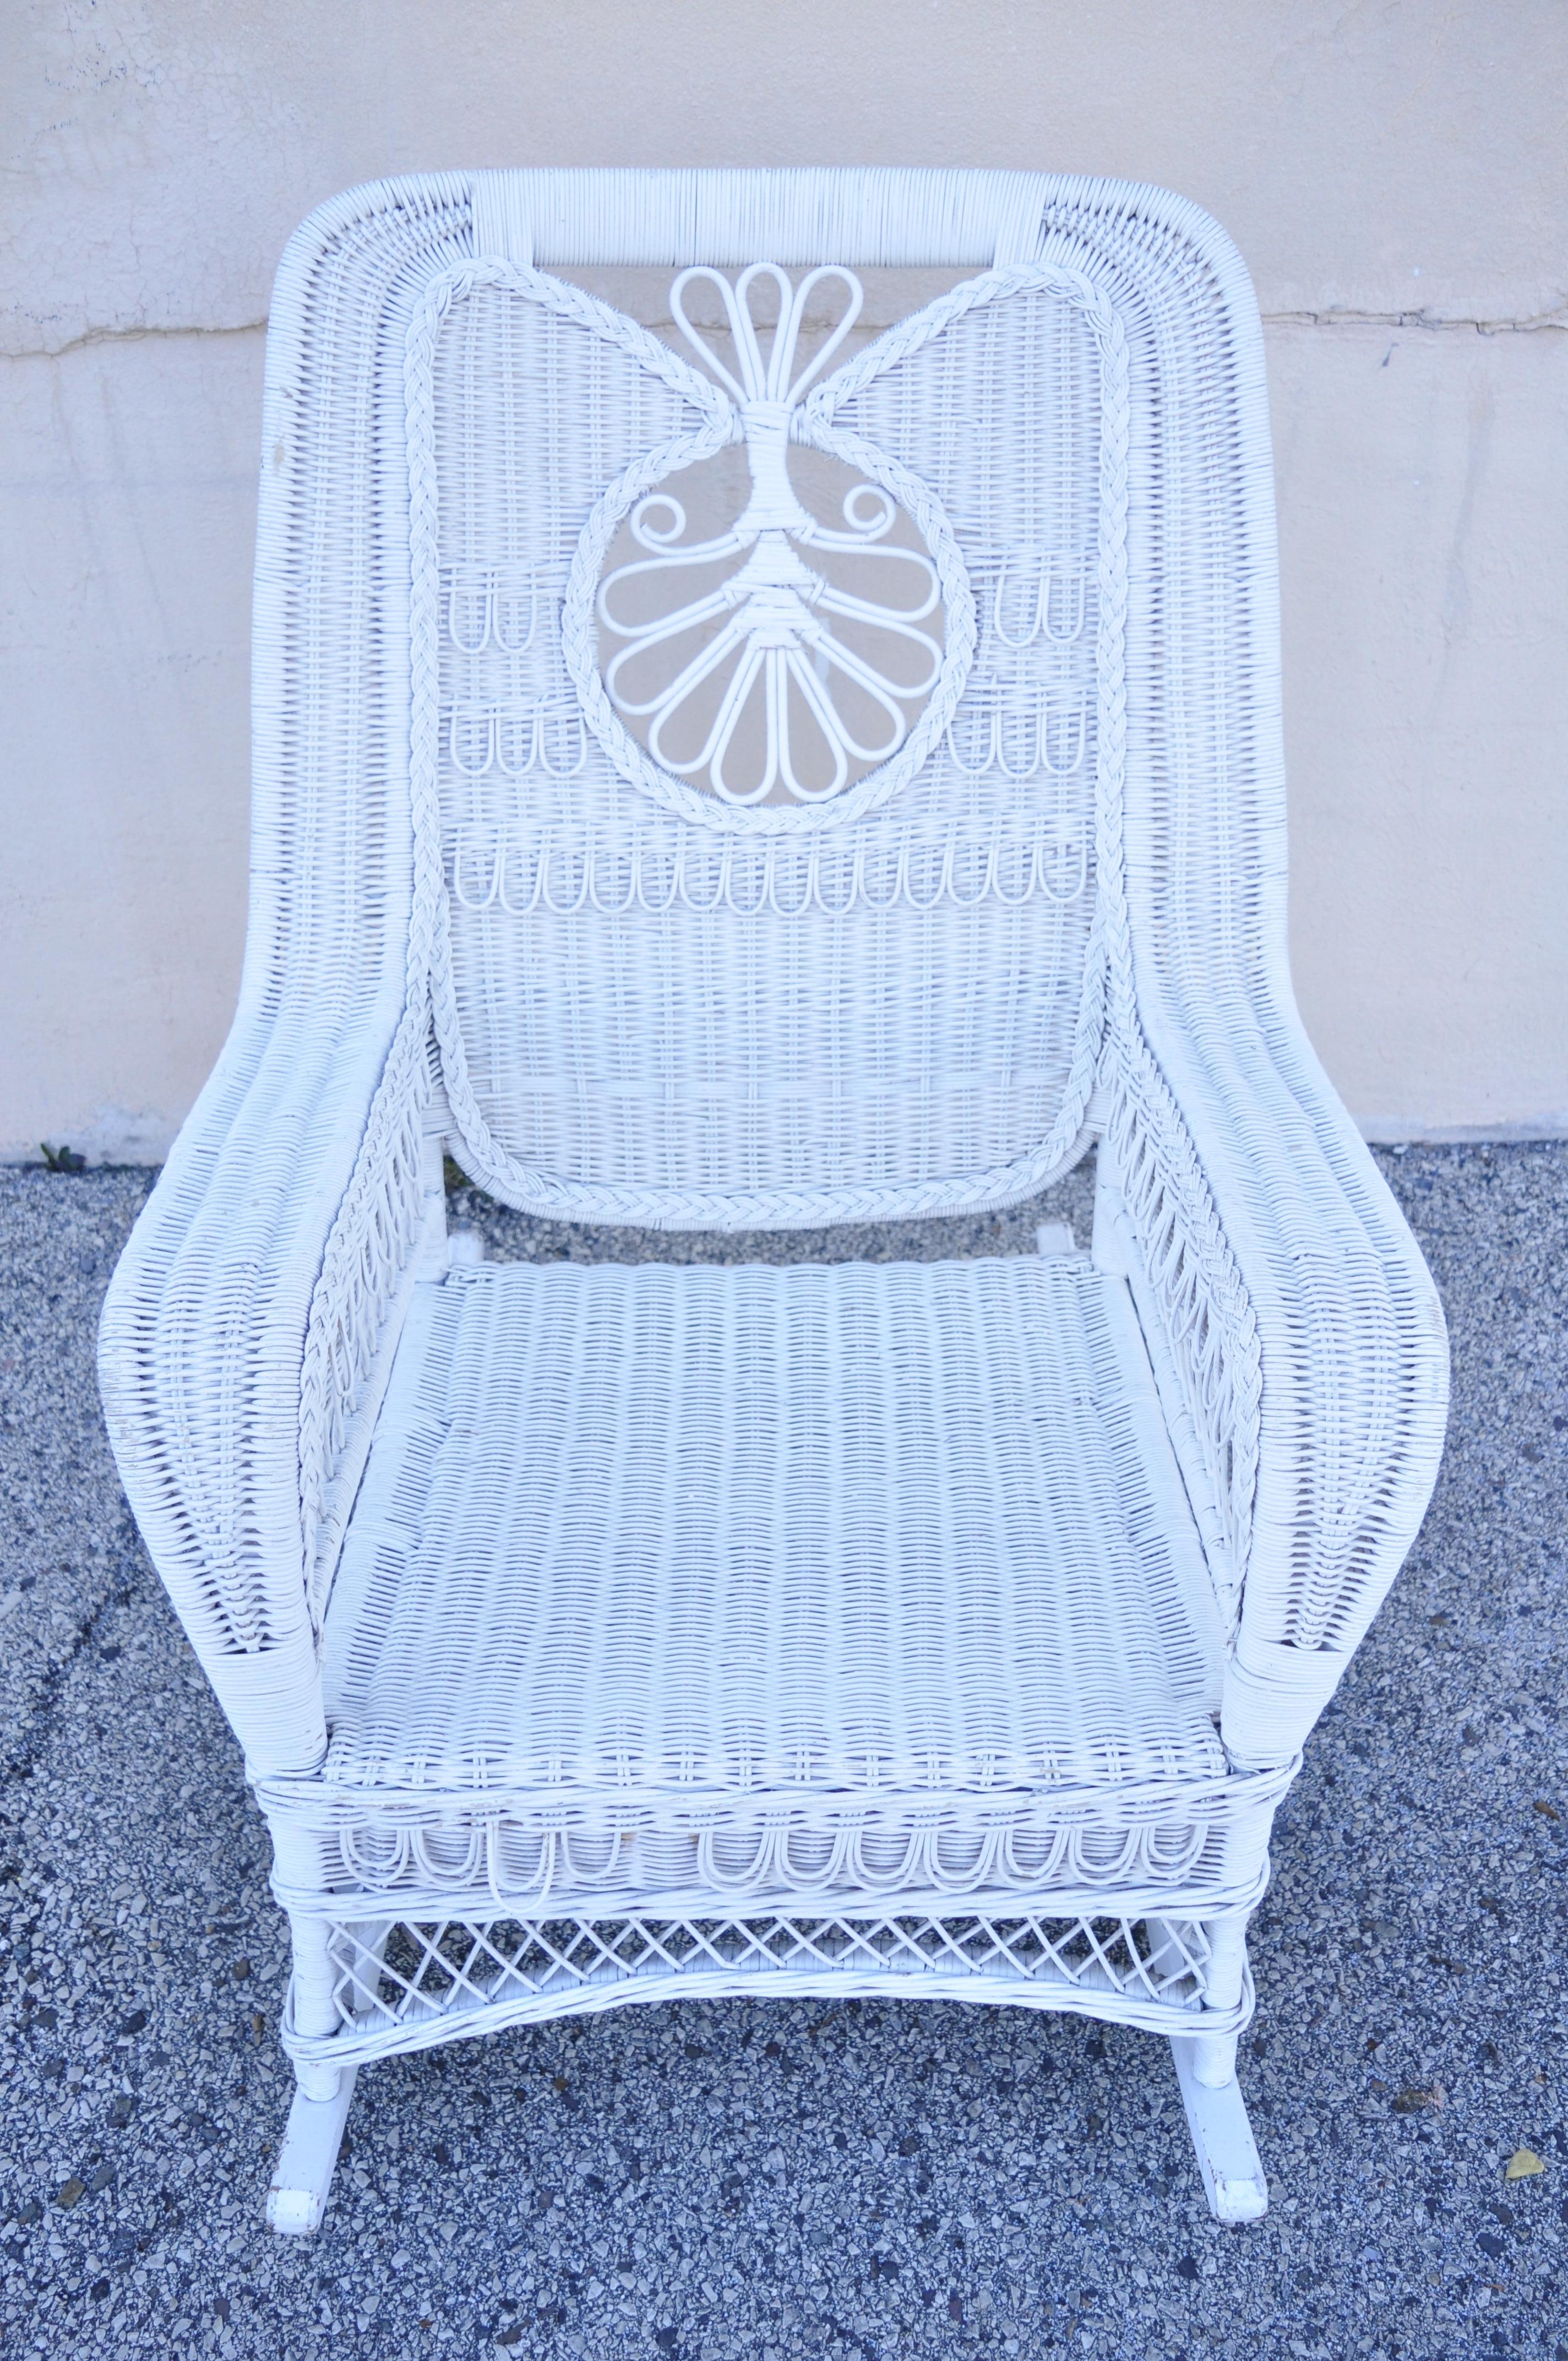 American Vintage Oversize White Victorian Style Wicker Rattan Rocking Chair Lounge Chair